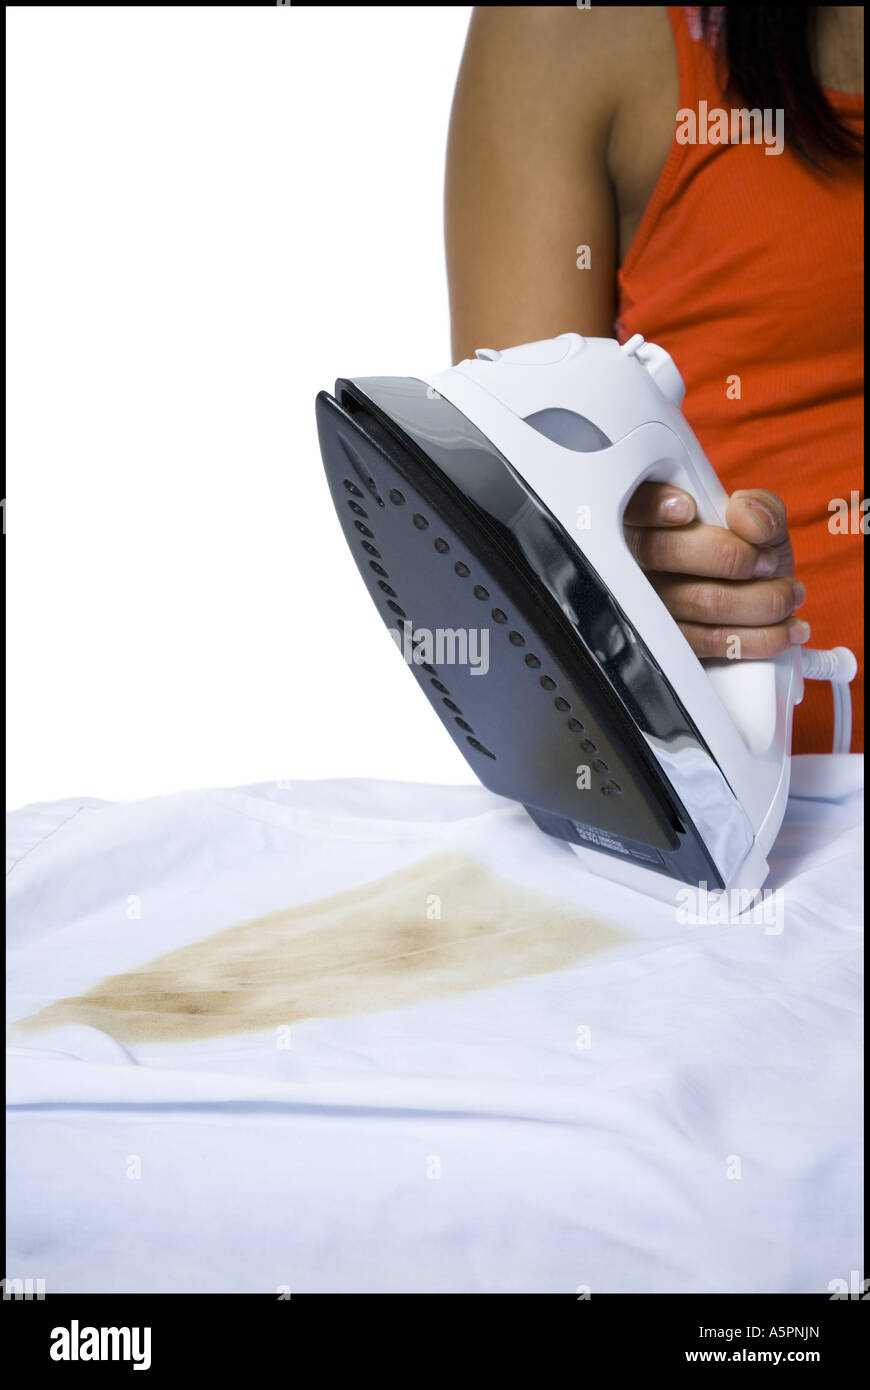 Distracted woman with iron and burned clothing Stock Photo